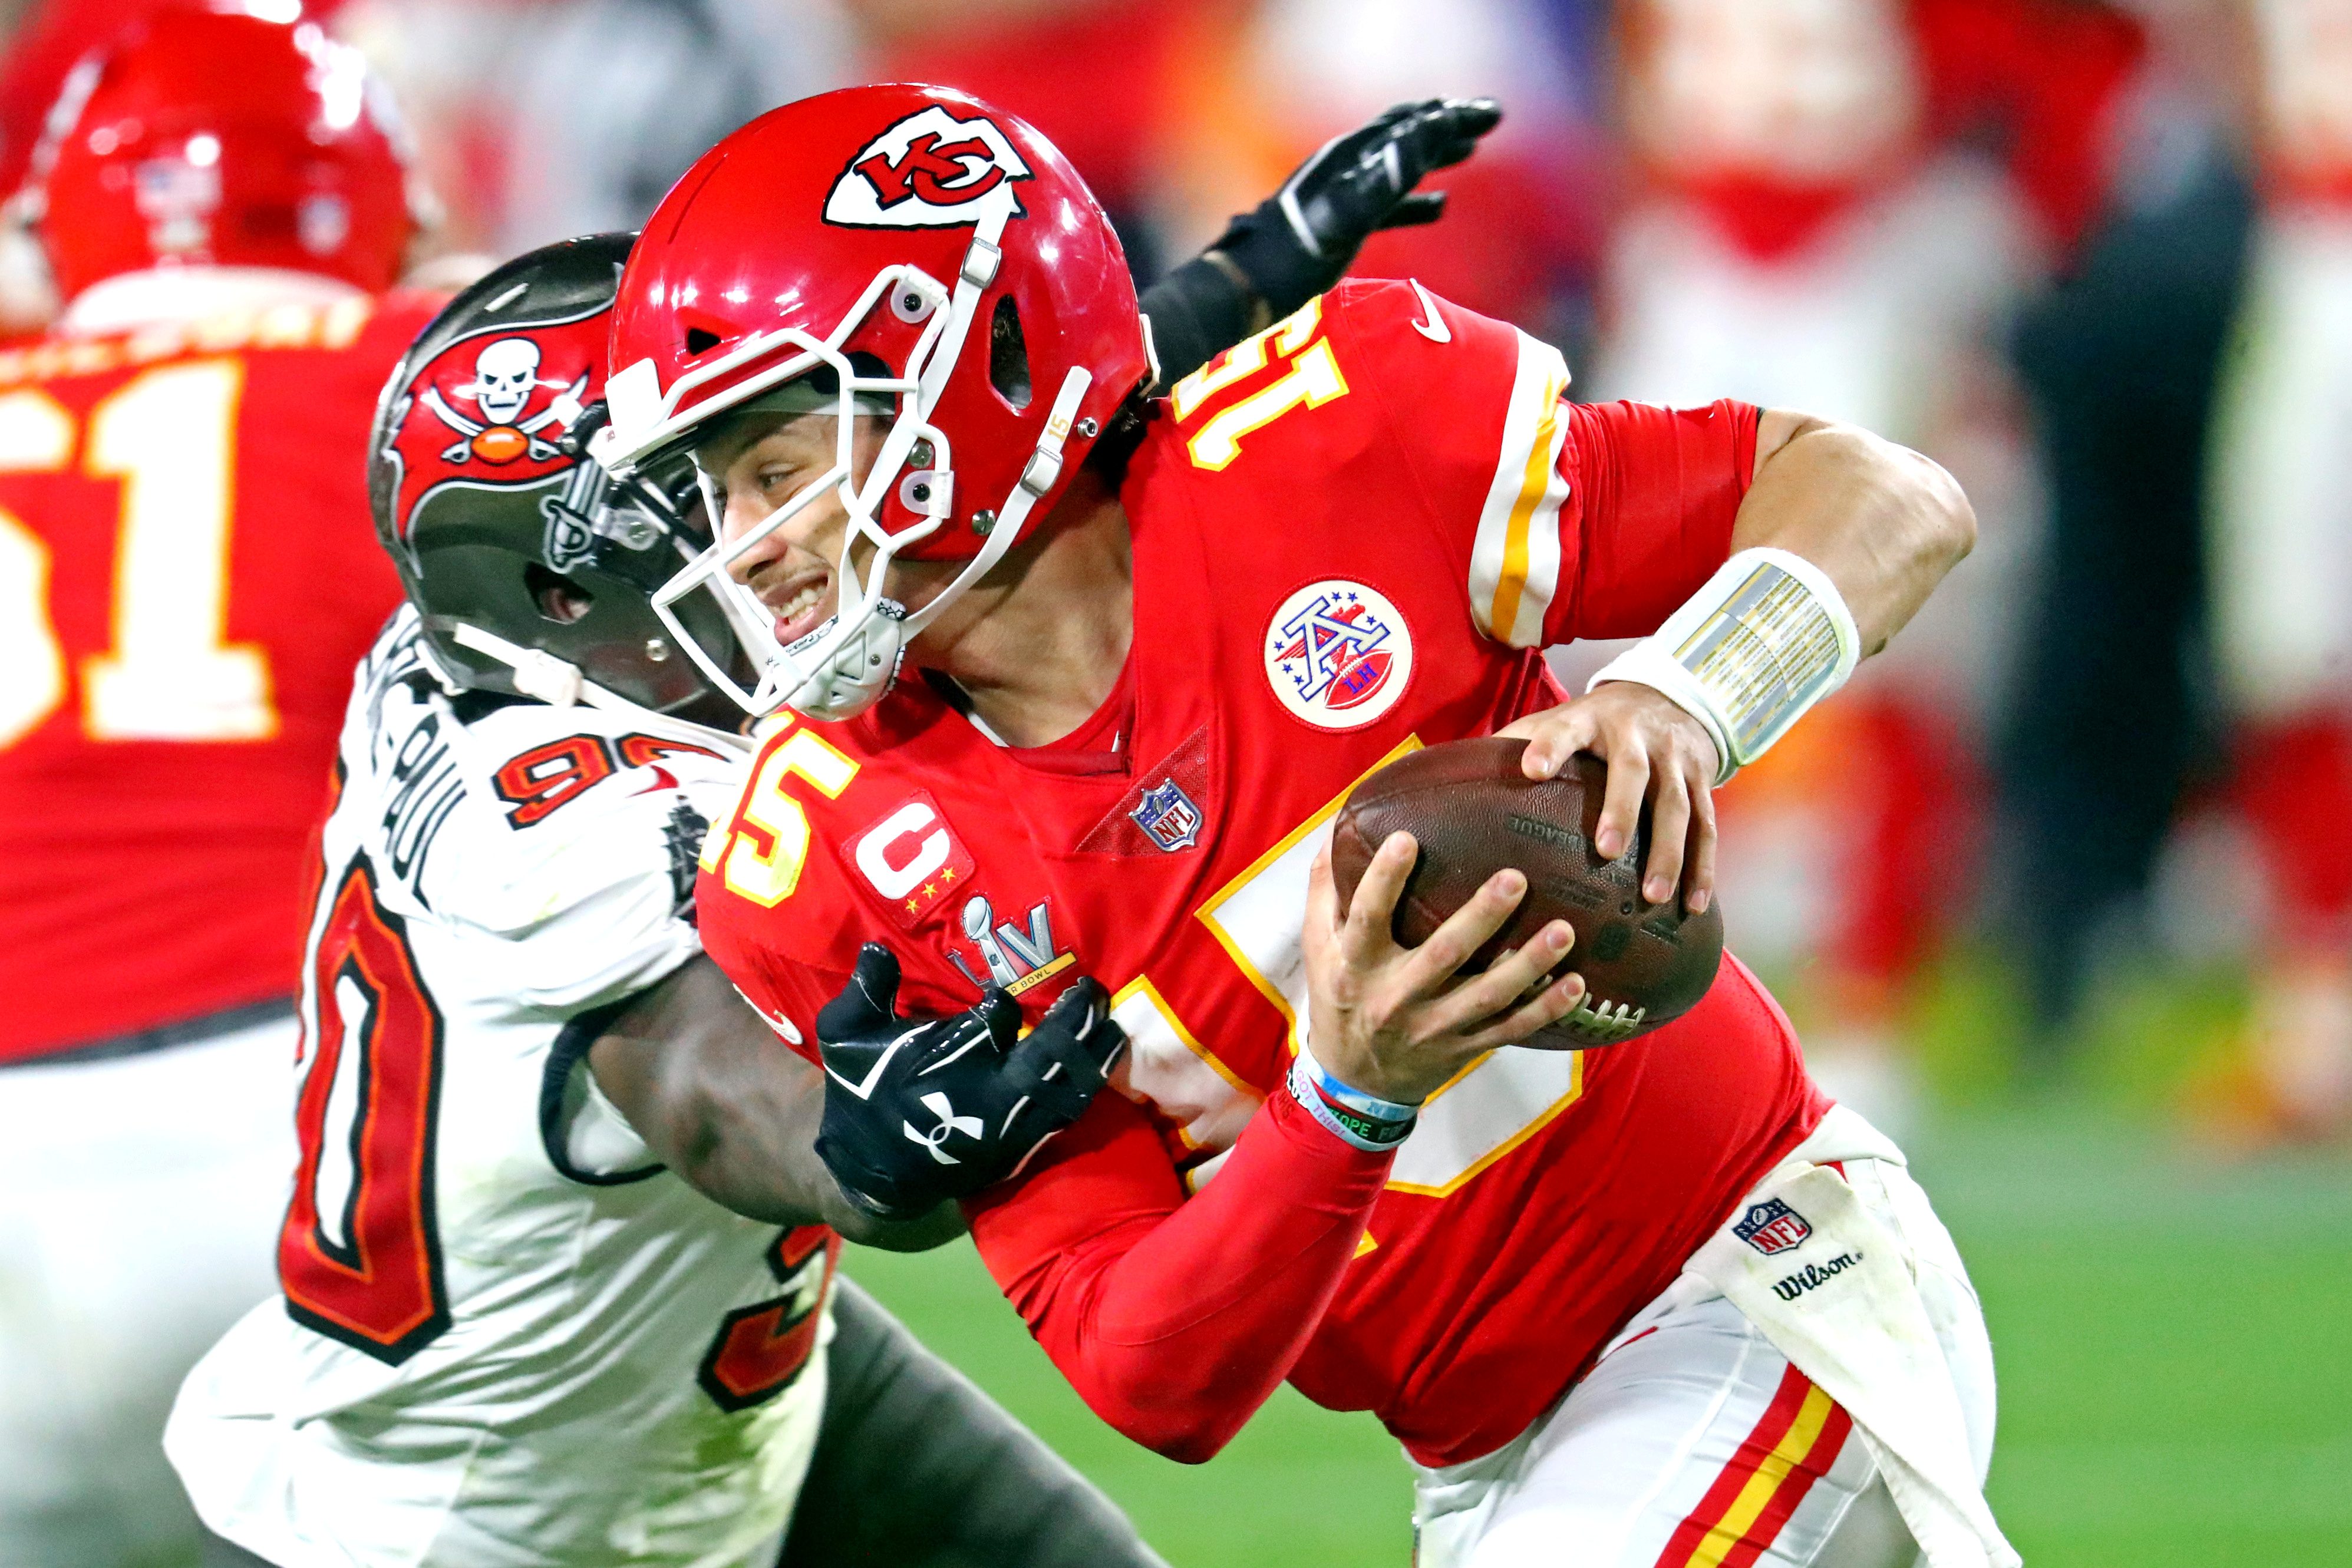 Mahomes motivated for rest of career by Super Bowl loss